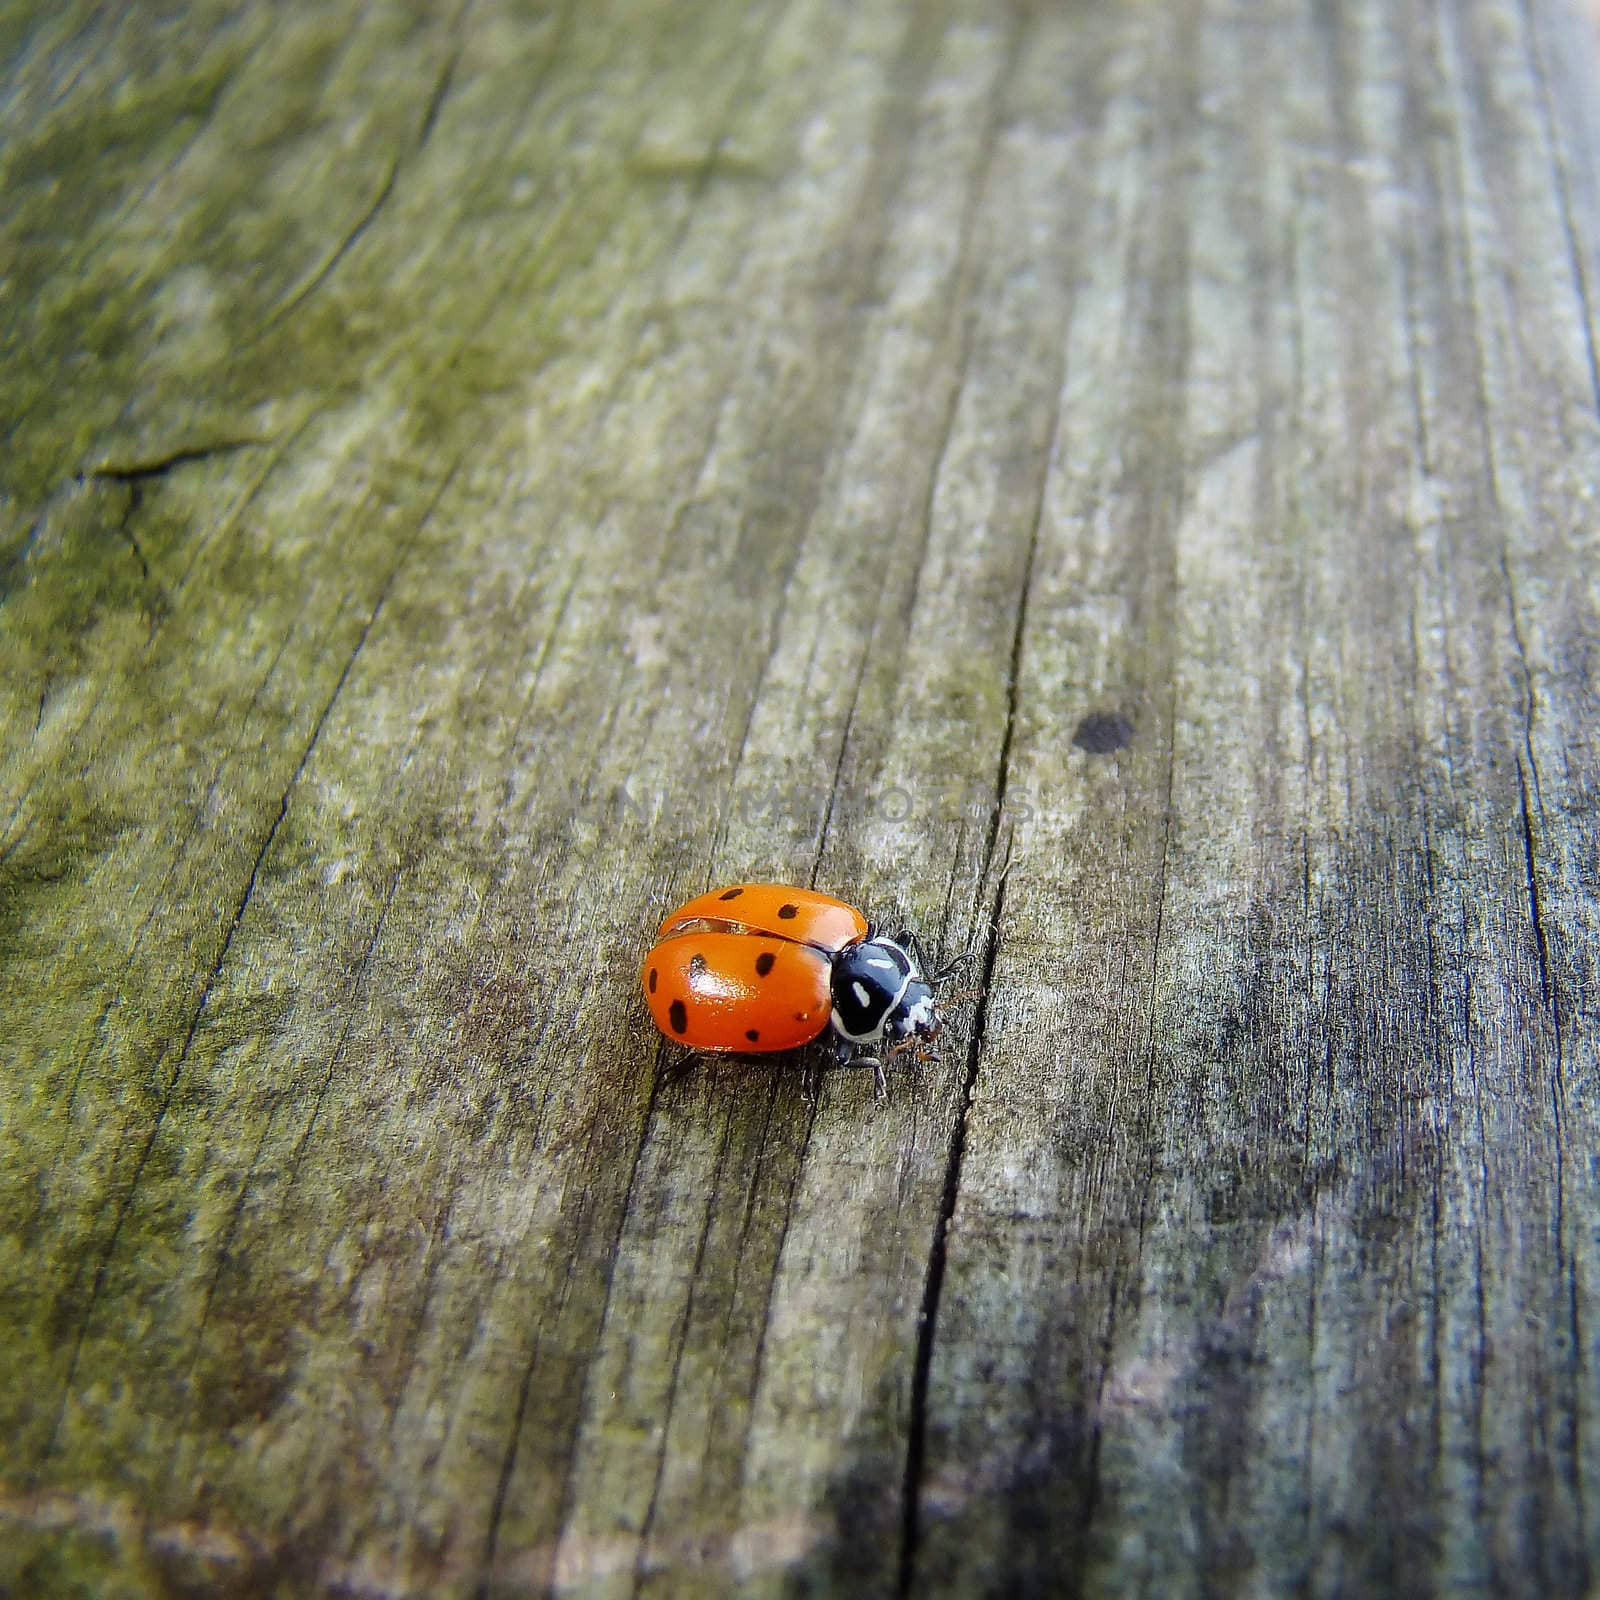 a ladybug hangs out on a slab of wood